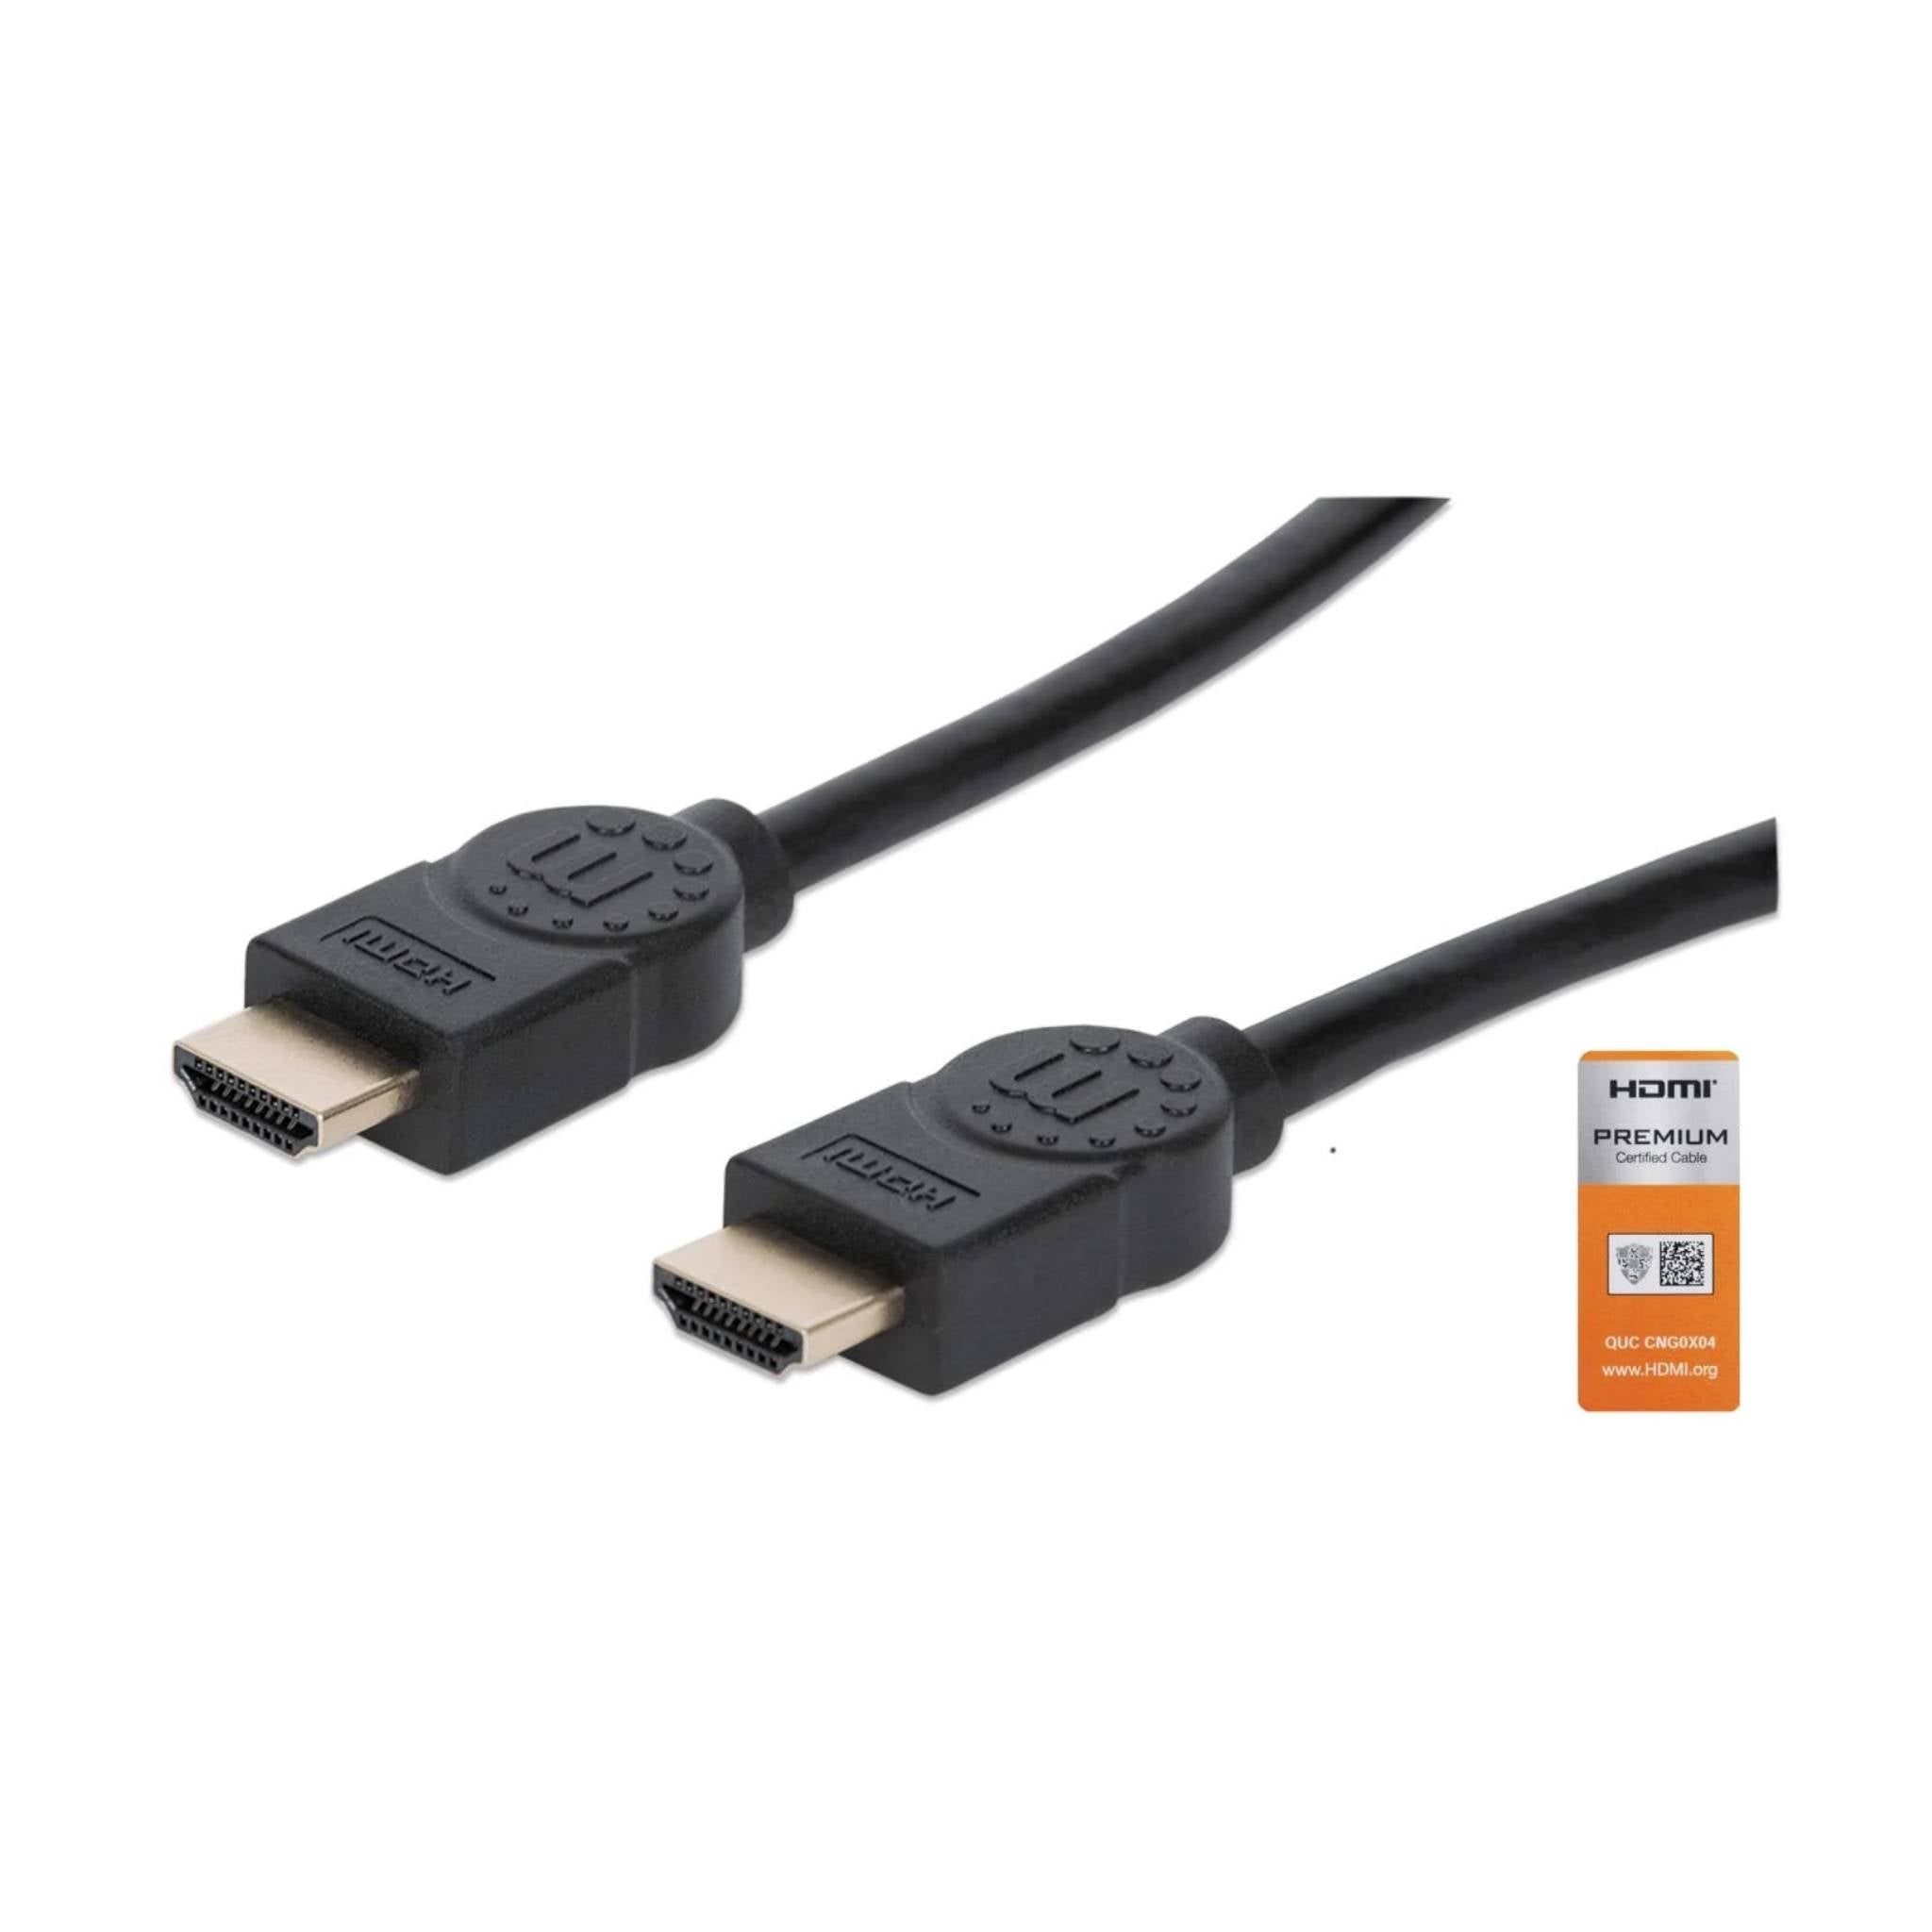 Ultra High Speed HDMI Cable - 3M (10ft) - 4K, HDR, Ethernet, 18Gbps, Certified Premium